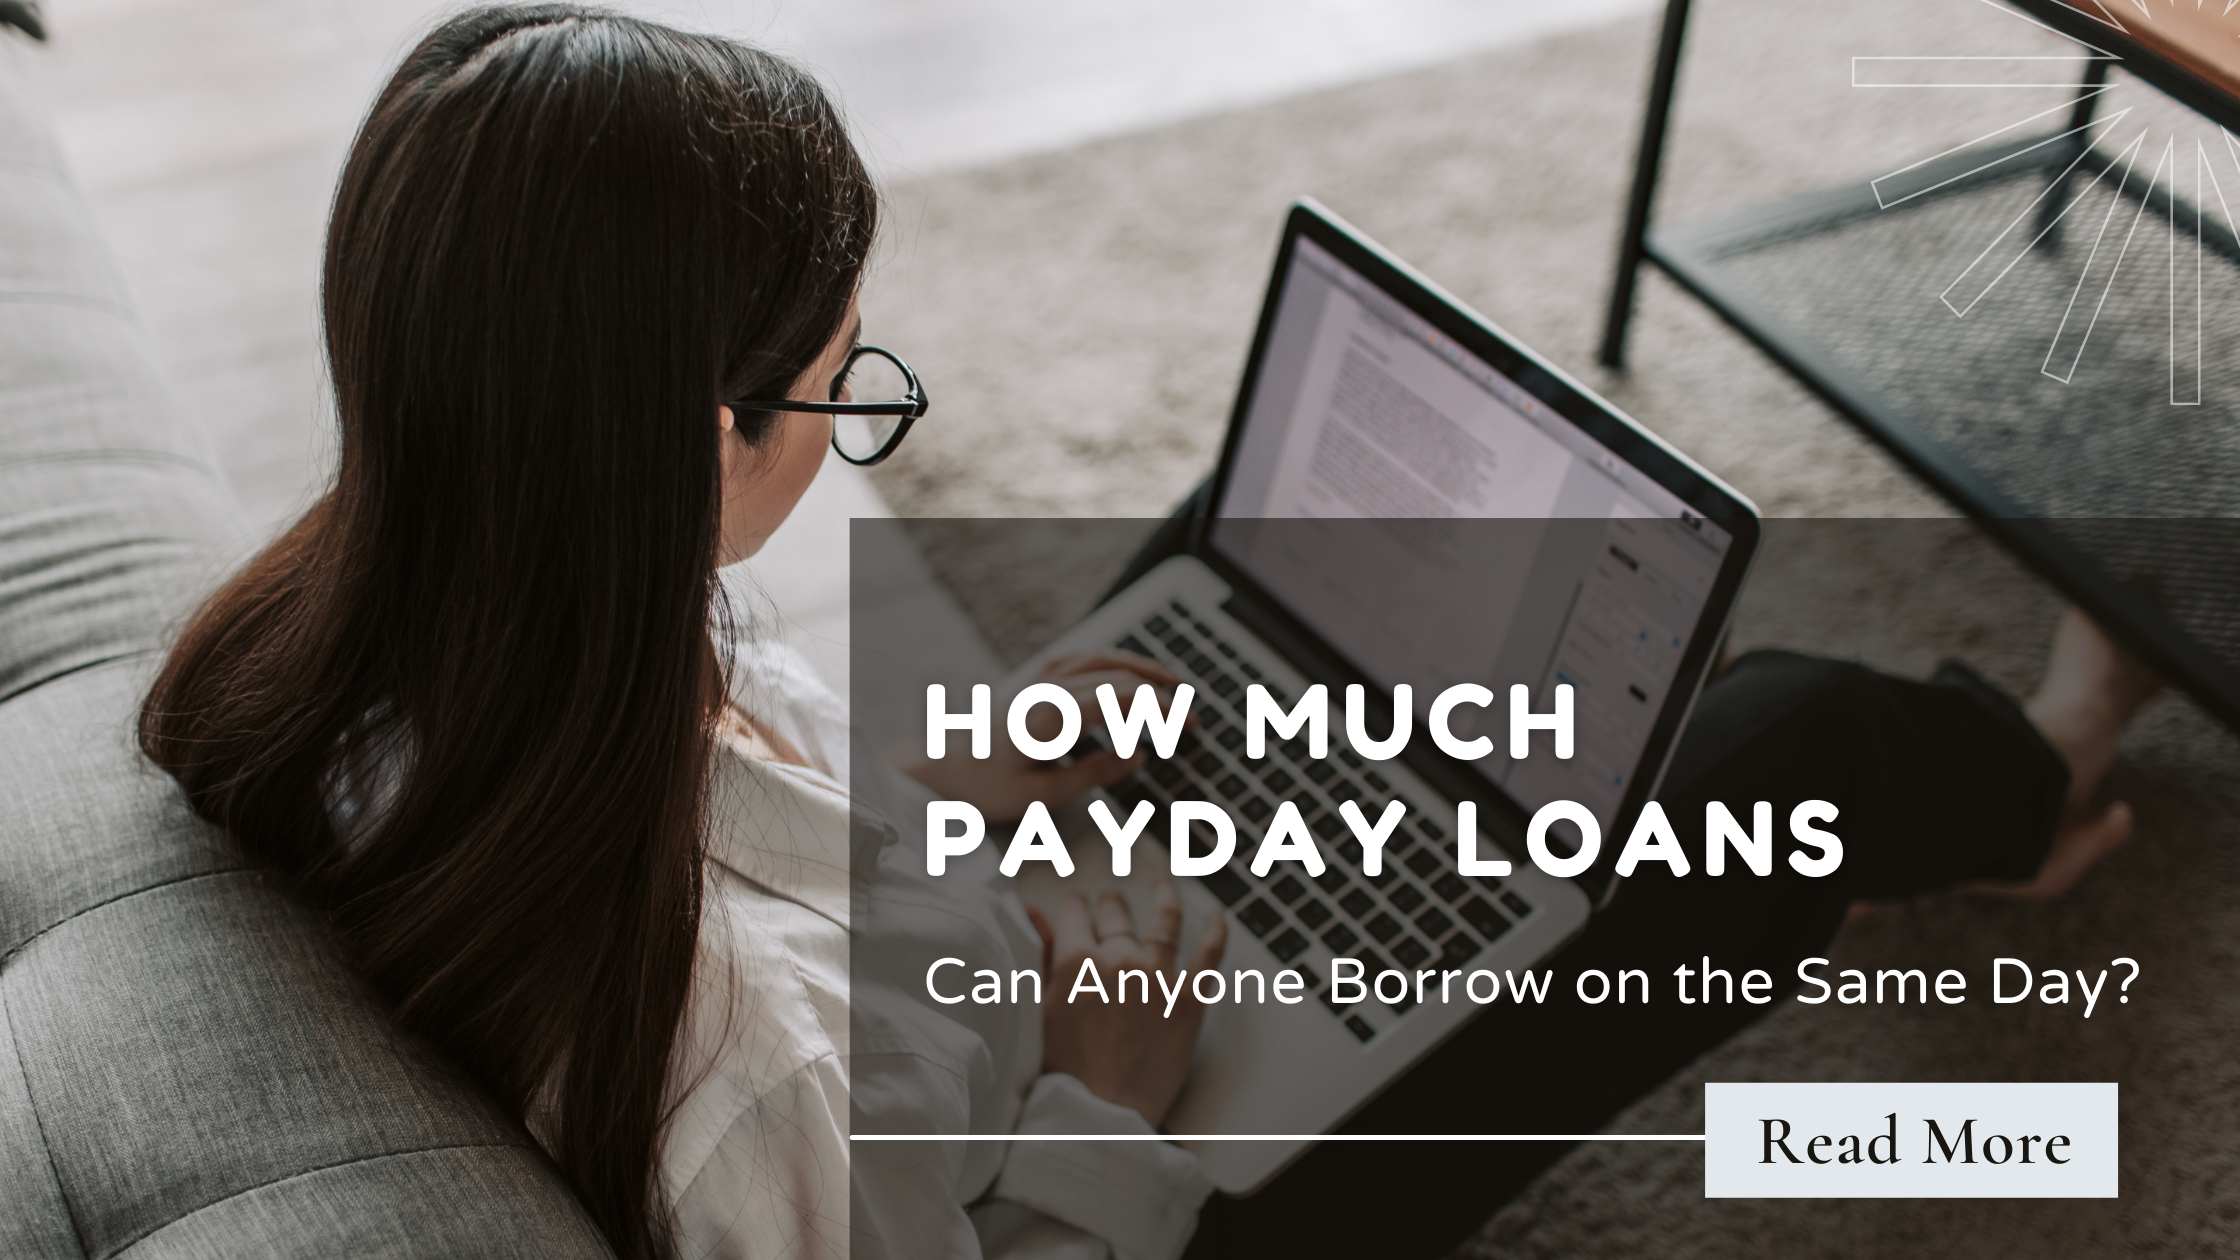 How Much Payday Loans Can Anyone Borrow on the Same Day